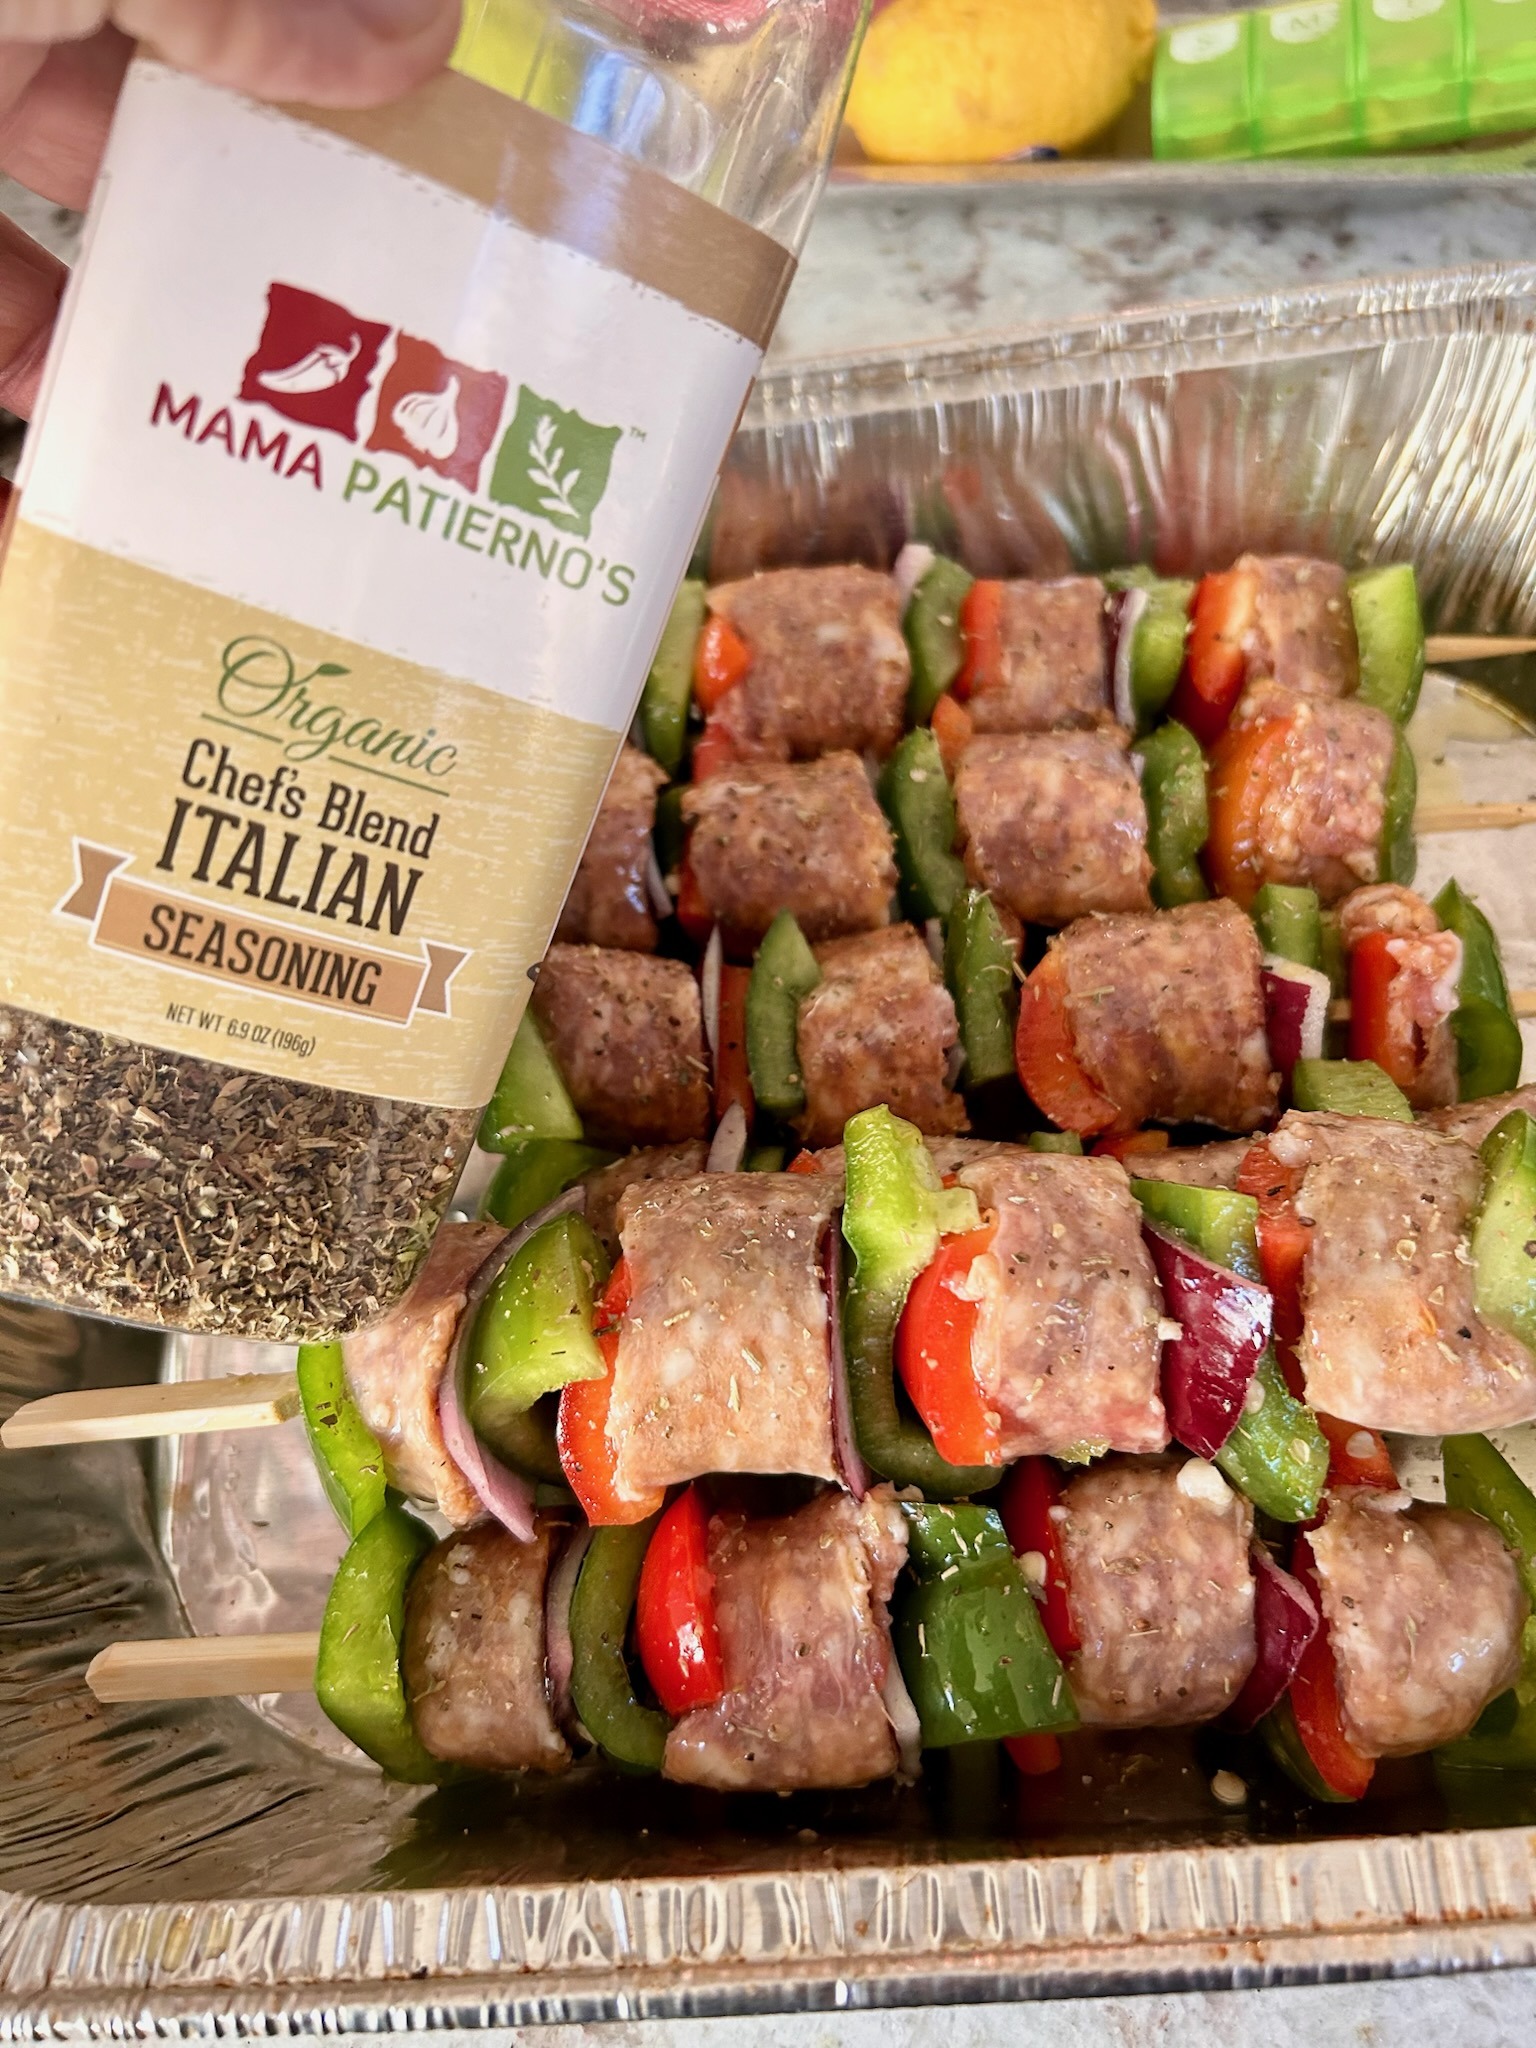 Mama Patierno's Italian Sausage and Peppers Kabobs on Skewers Recipe Image 2